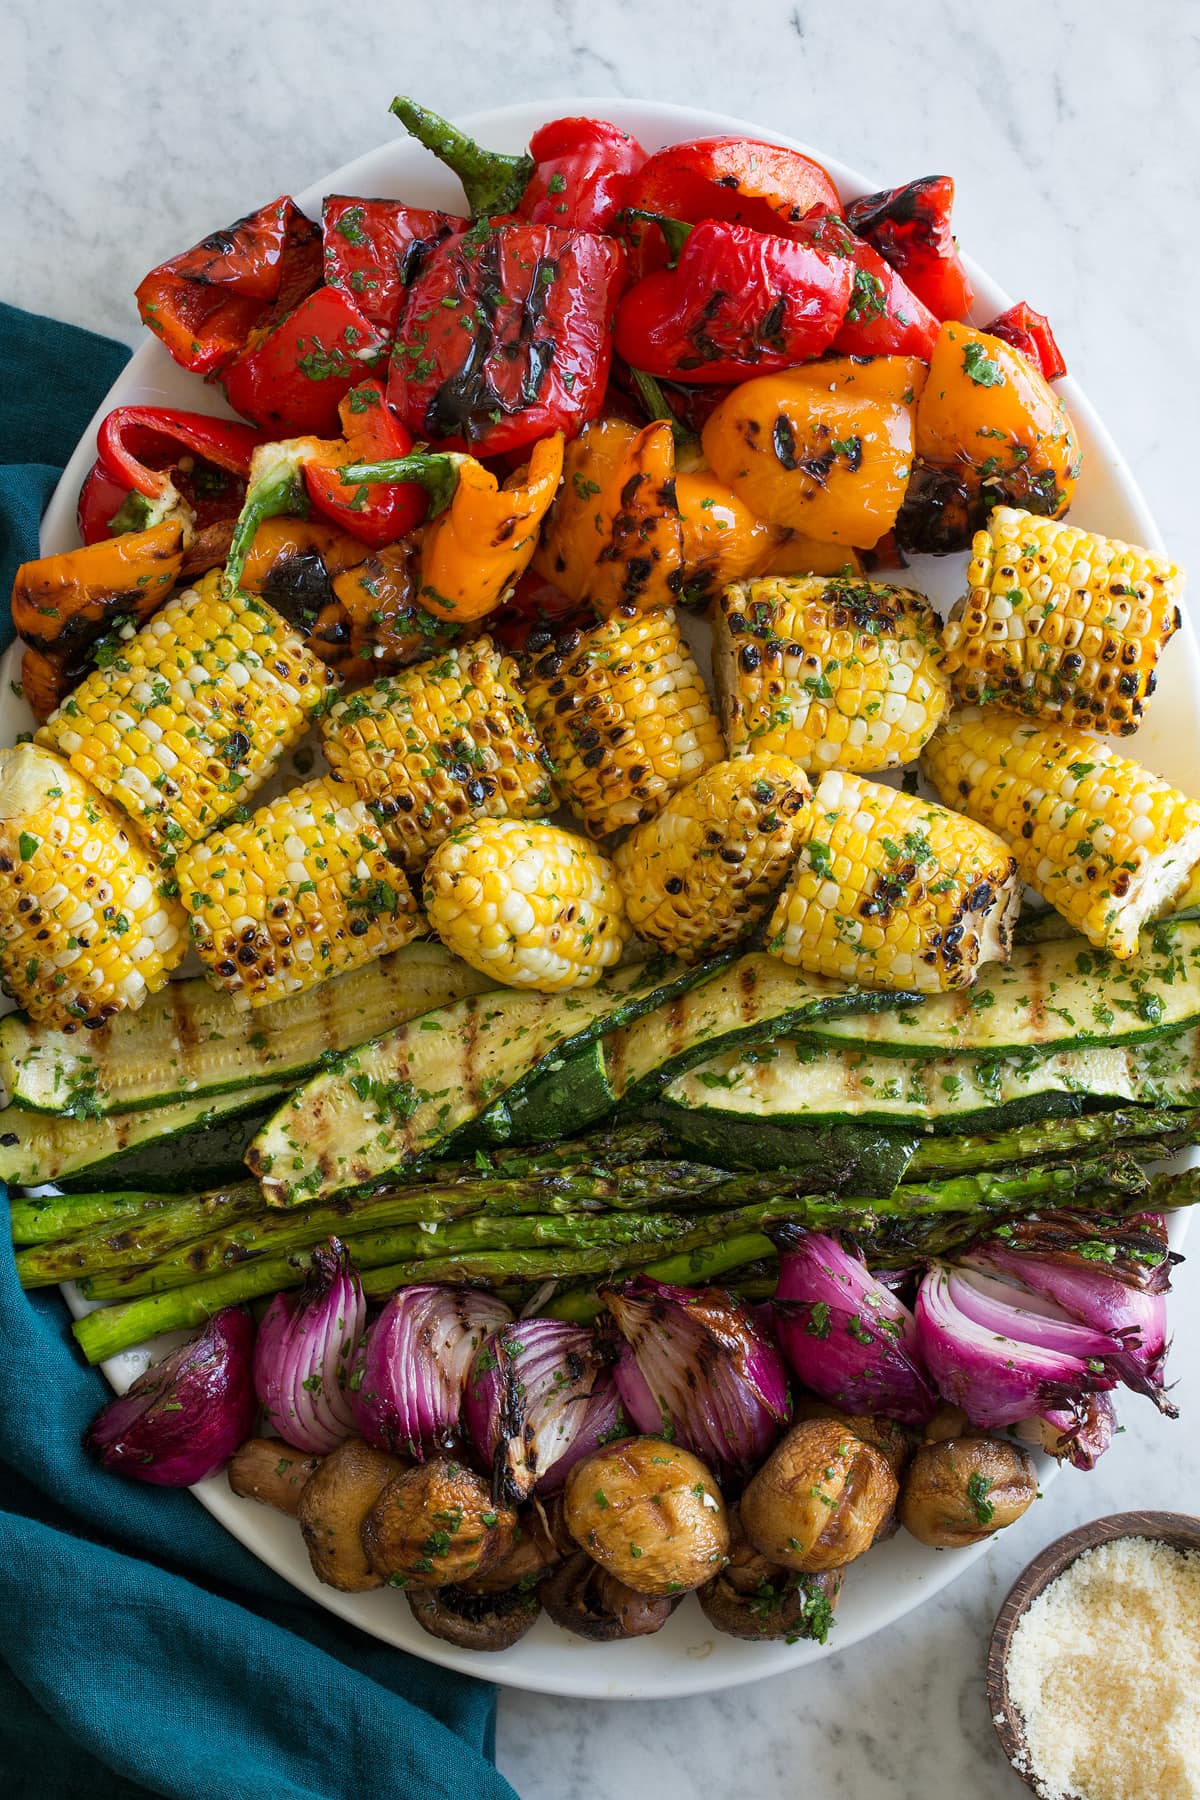 I. Introduction to Grilling Vegetables